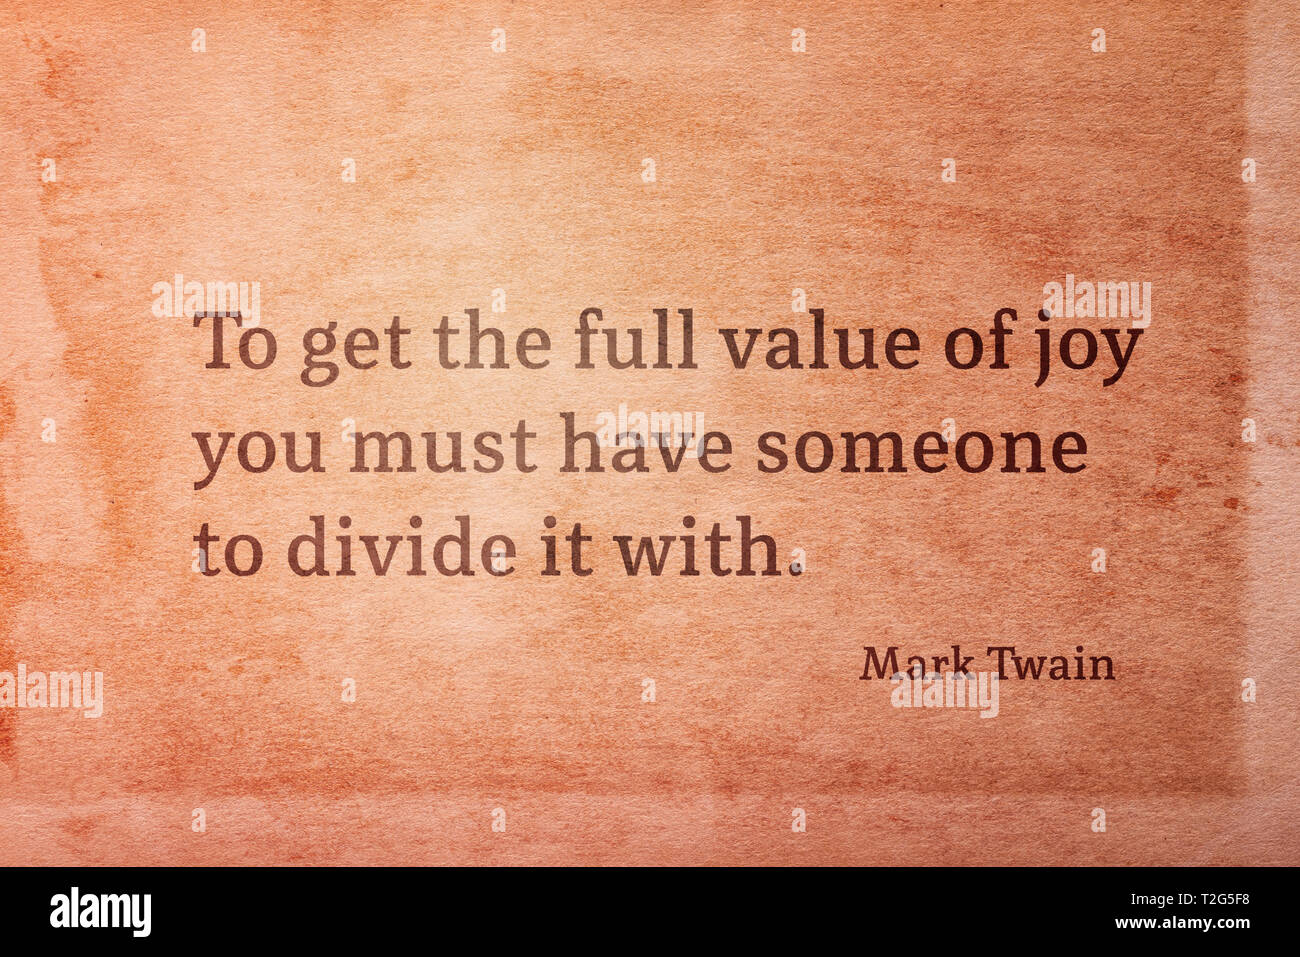 To get the full value of joy you must have someone to divide it with - famous American writer Mark Twain quote printed on vintage grunge paper Stock Photo